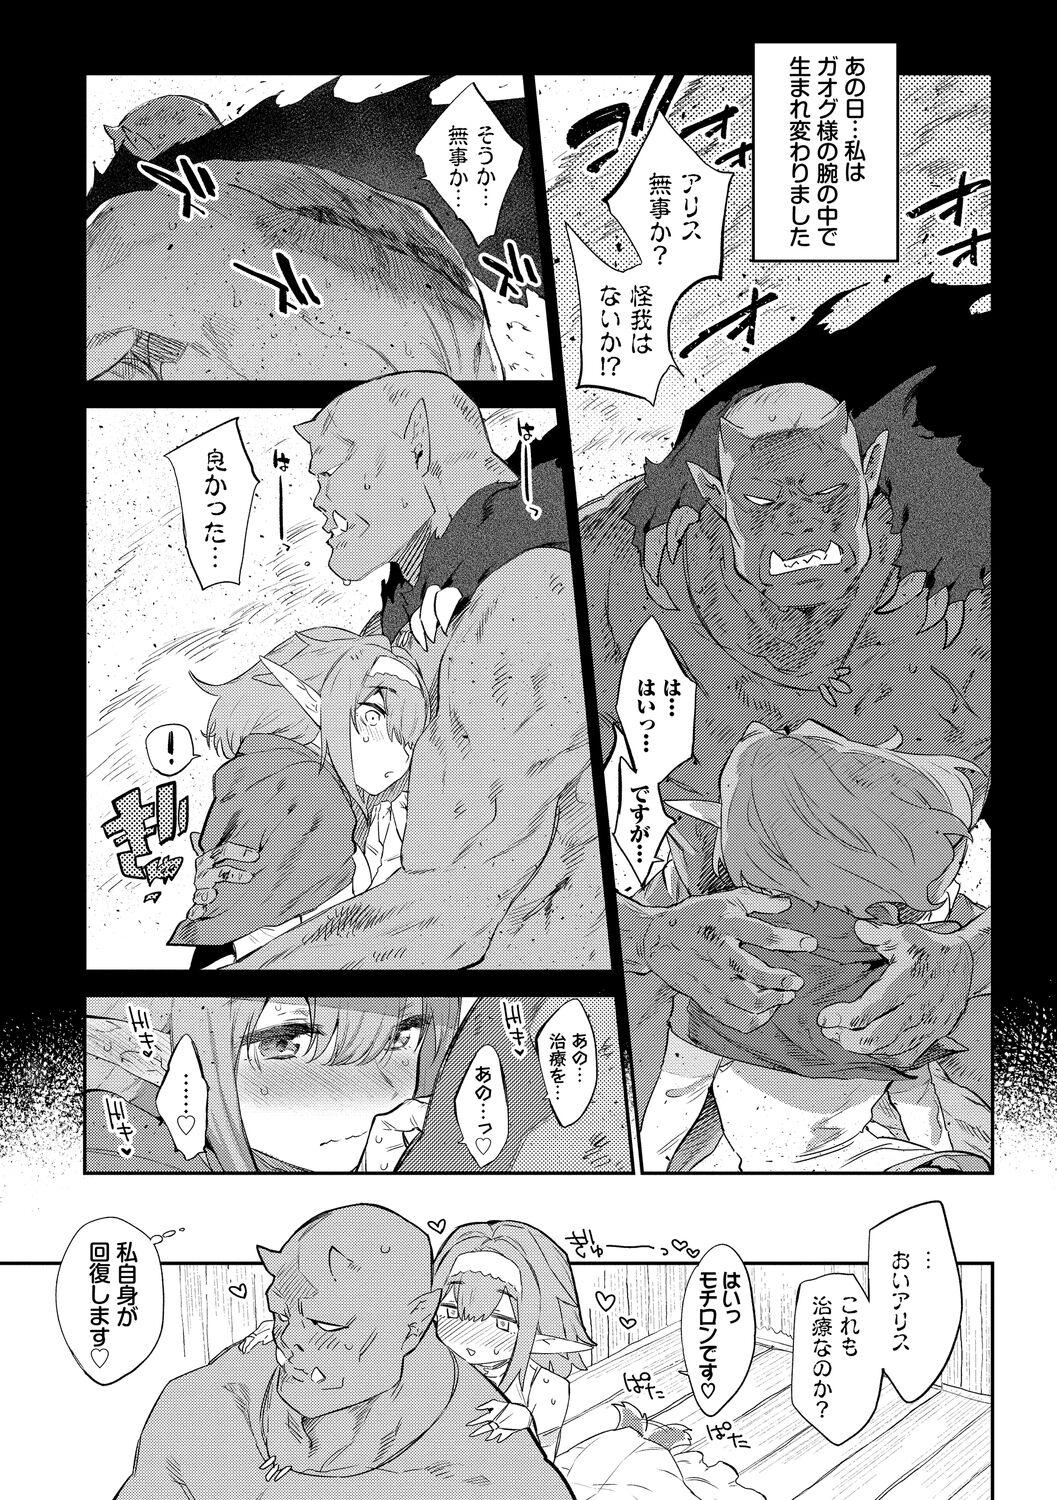 Ihou no Otome - Monster Girls in Another World 6